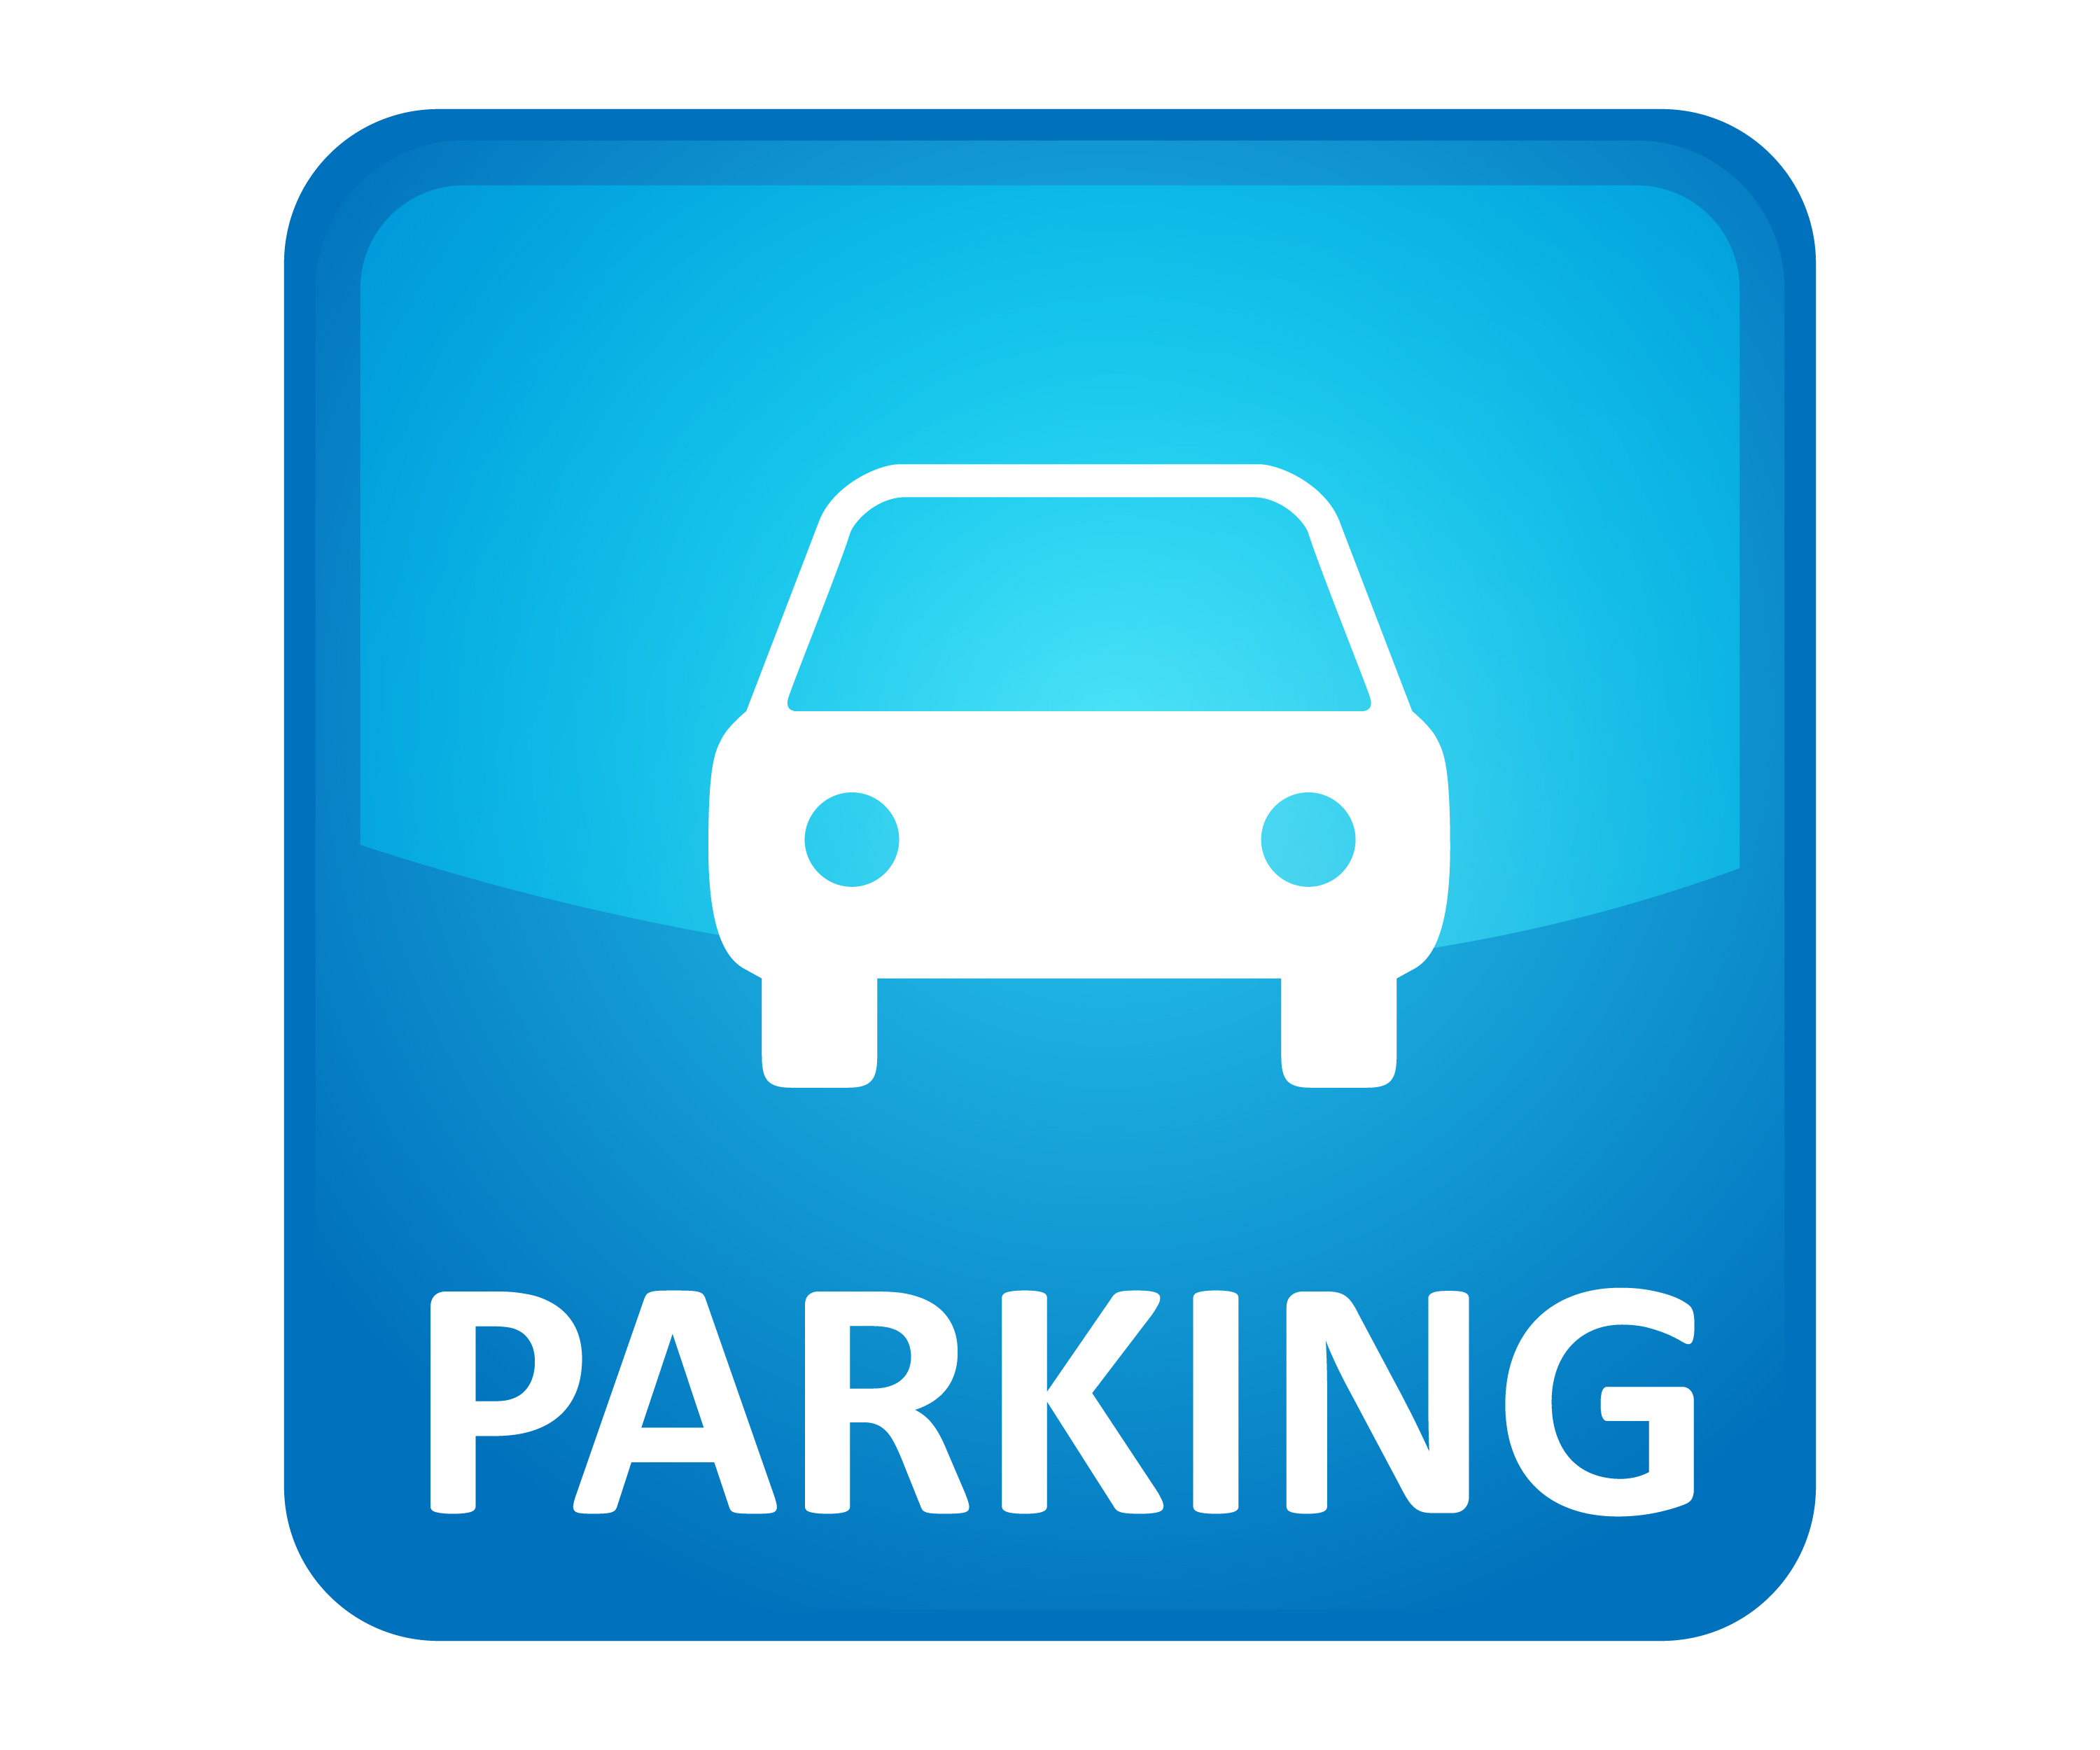 Parking Icons - 3,620 free vector icons